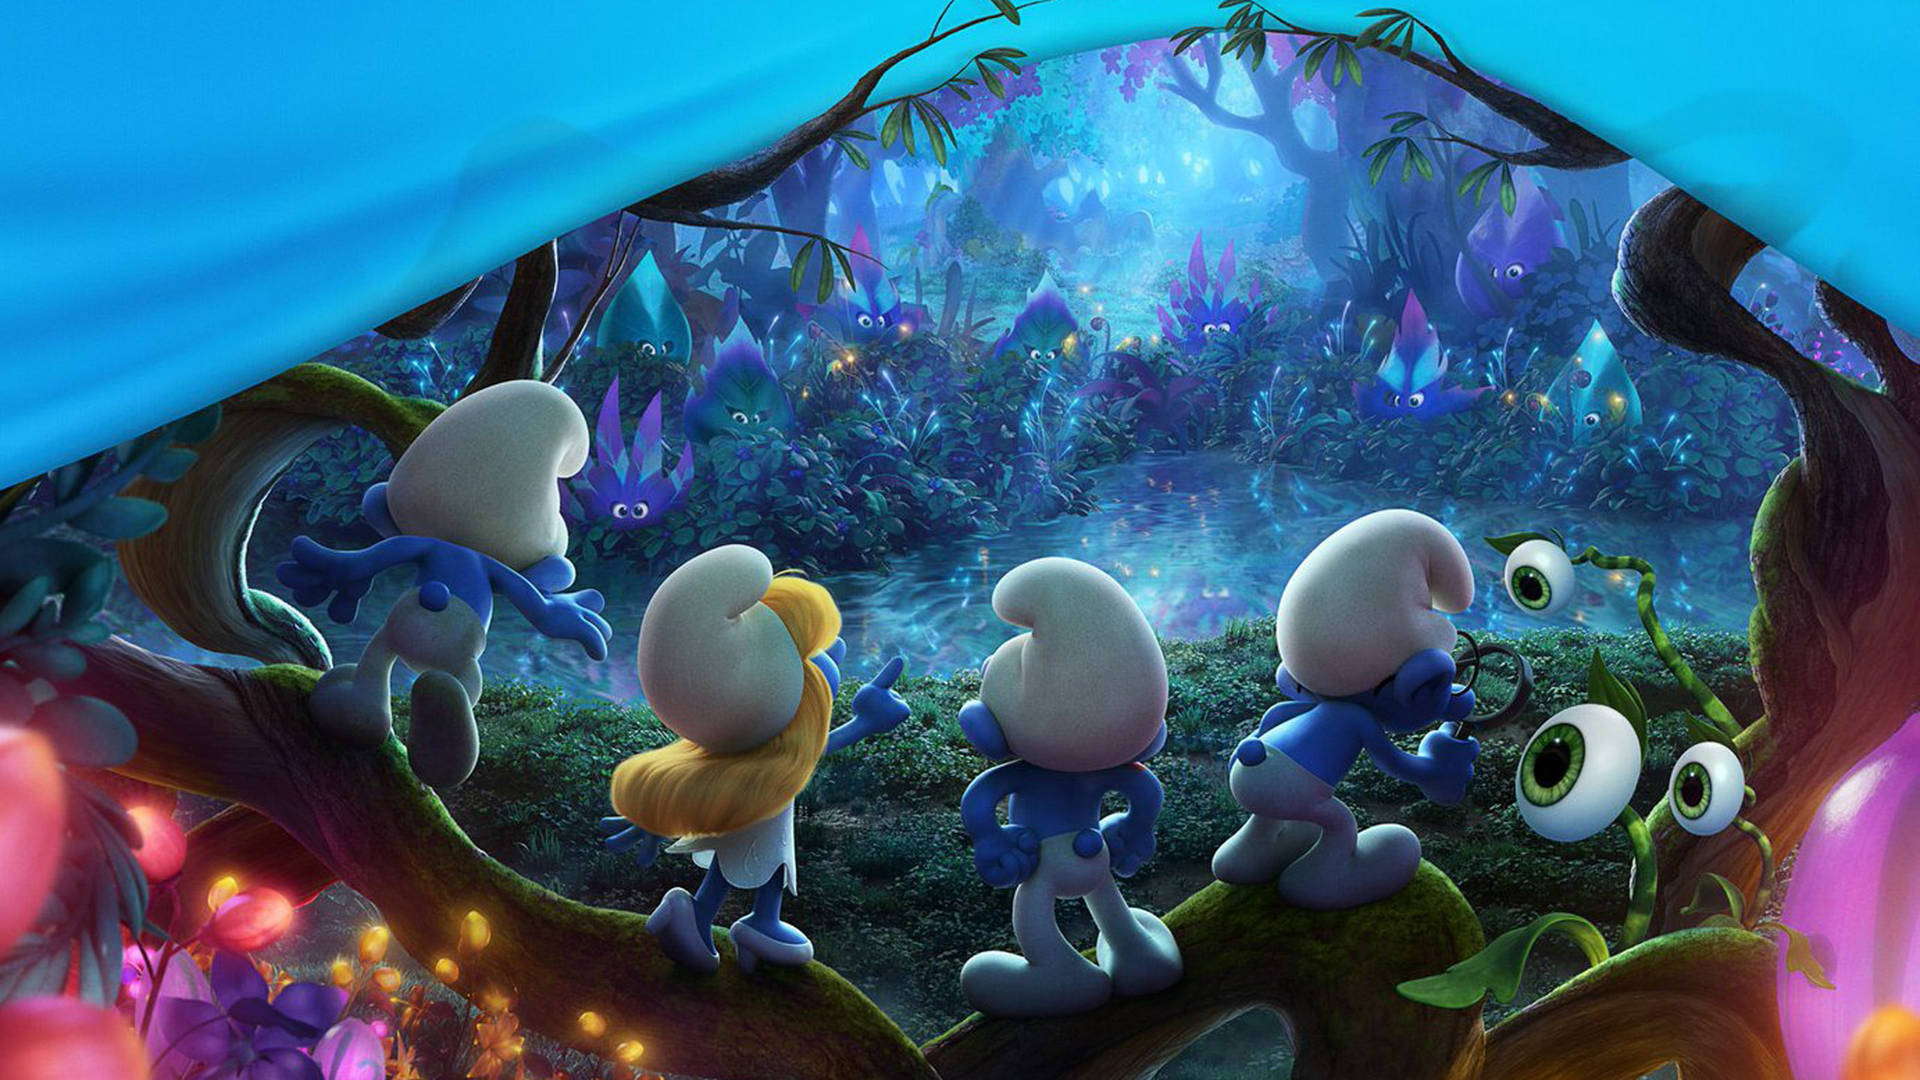 The Smurfs Magical Lost Village Background